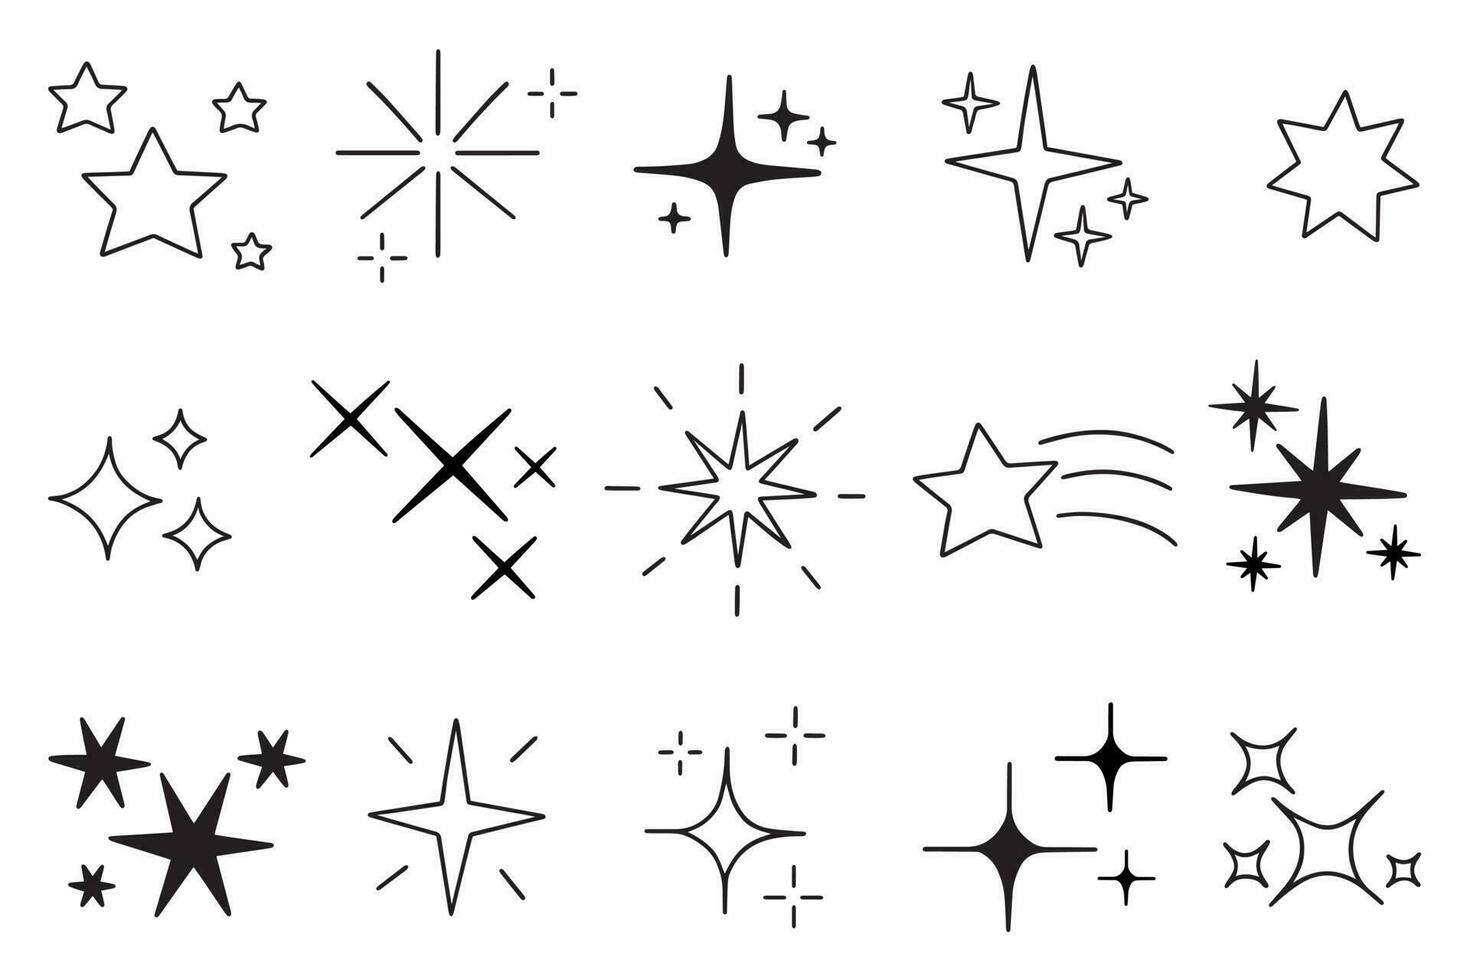 Sparkles and Twinkling stars doodle set. Glitter burst, shining star, falling star, firework, magic sparkle icons. Hand drawn vector illustration isolated on white background.